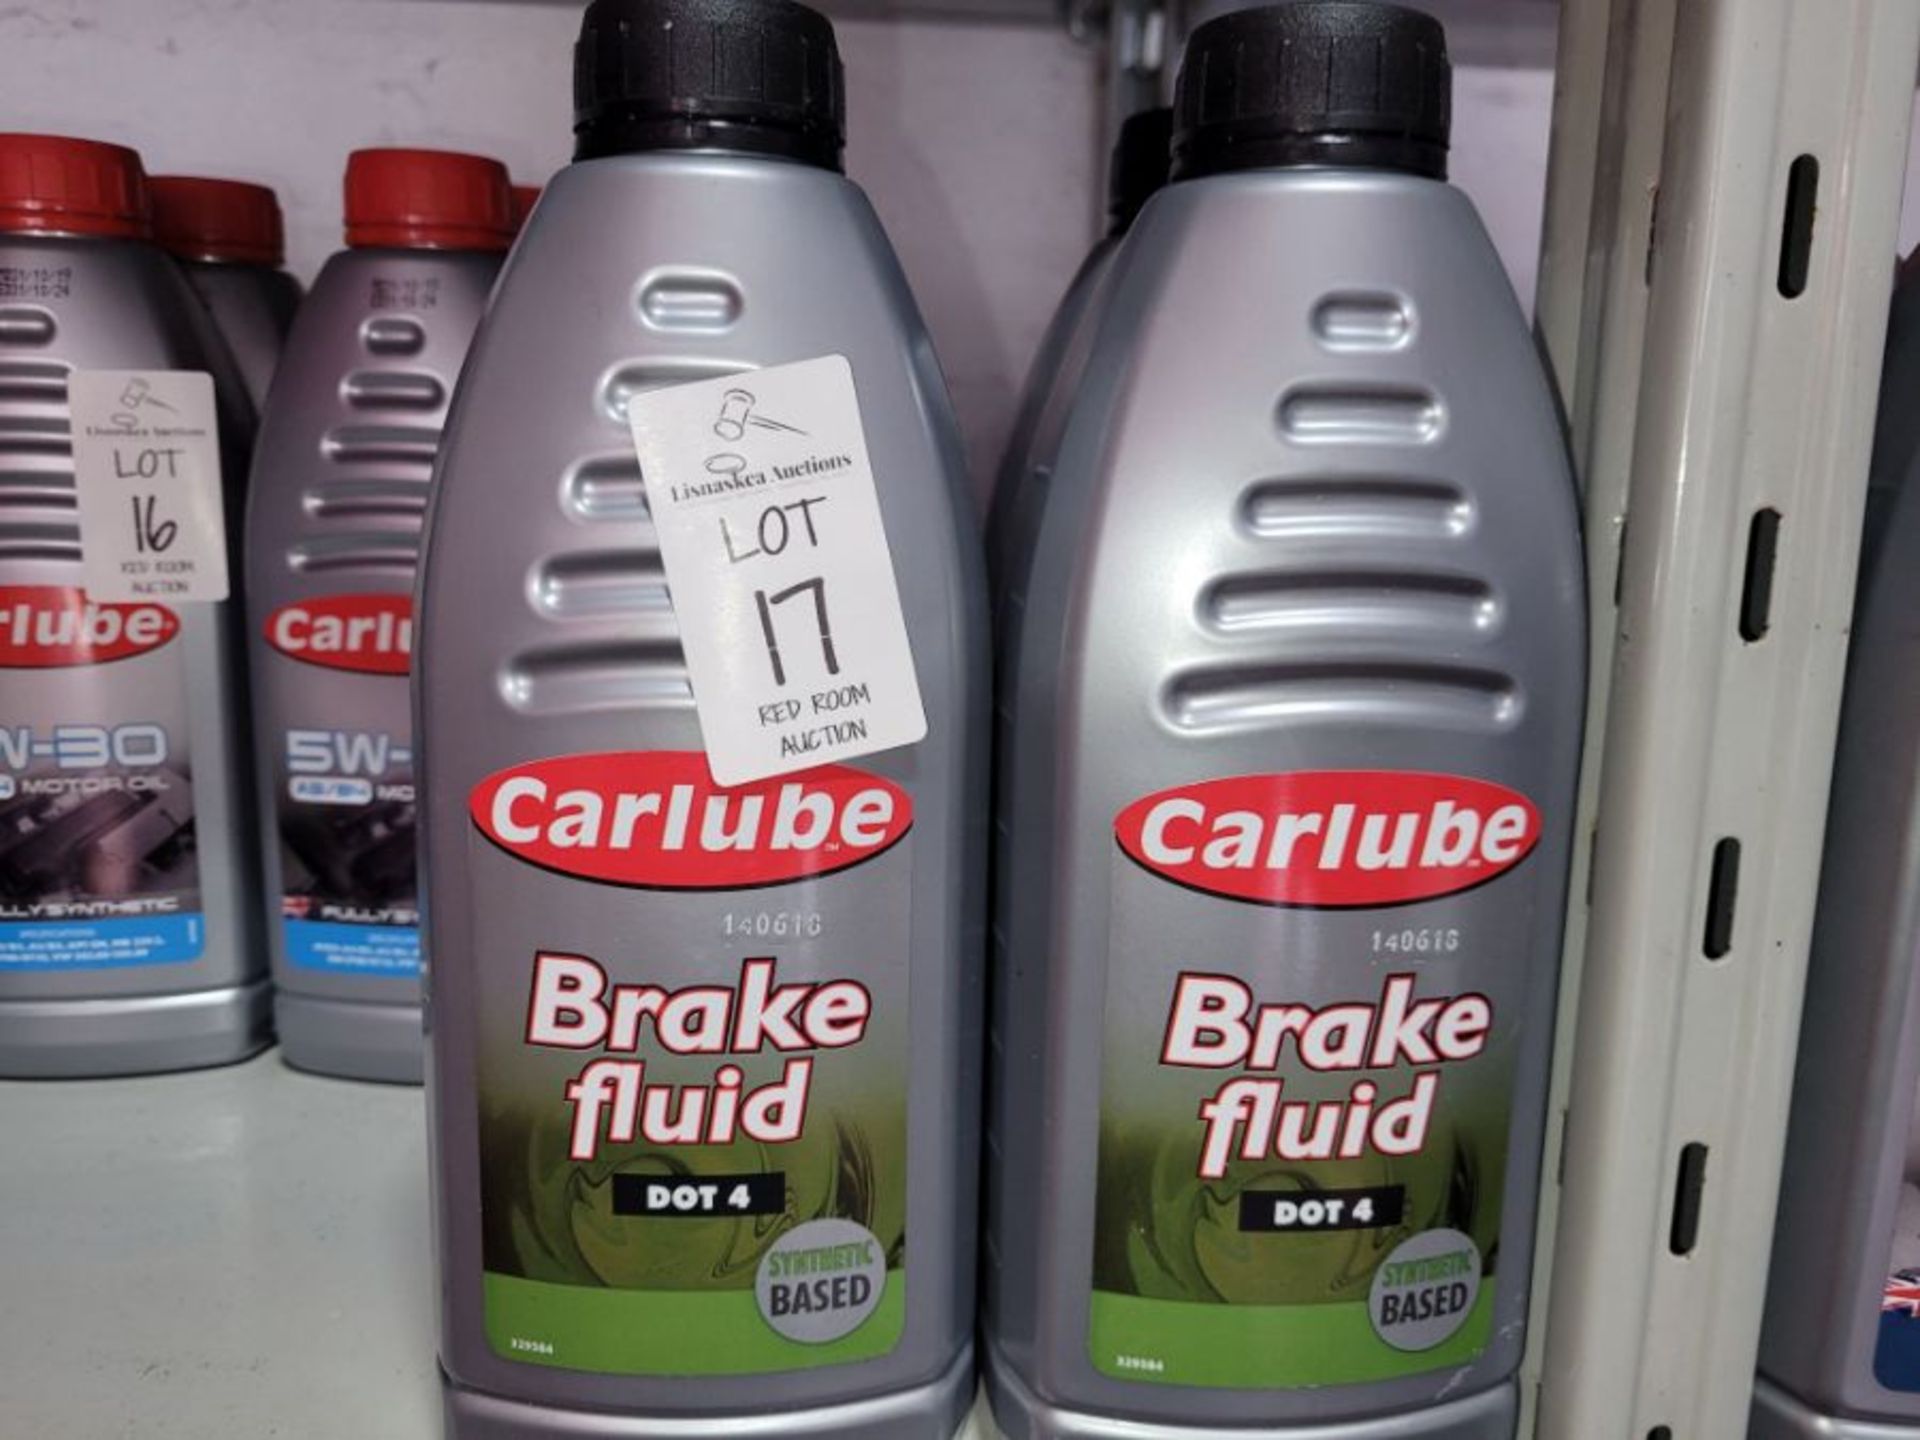 3x CARLUBE BRAKE FLUID DOT 4 SYNTHETIC BASED 1L - Image 2 of 3